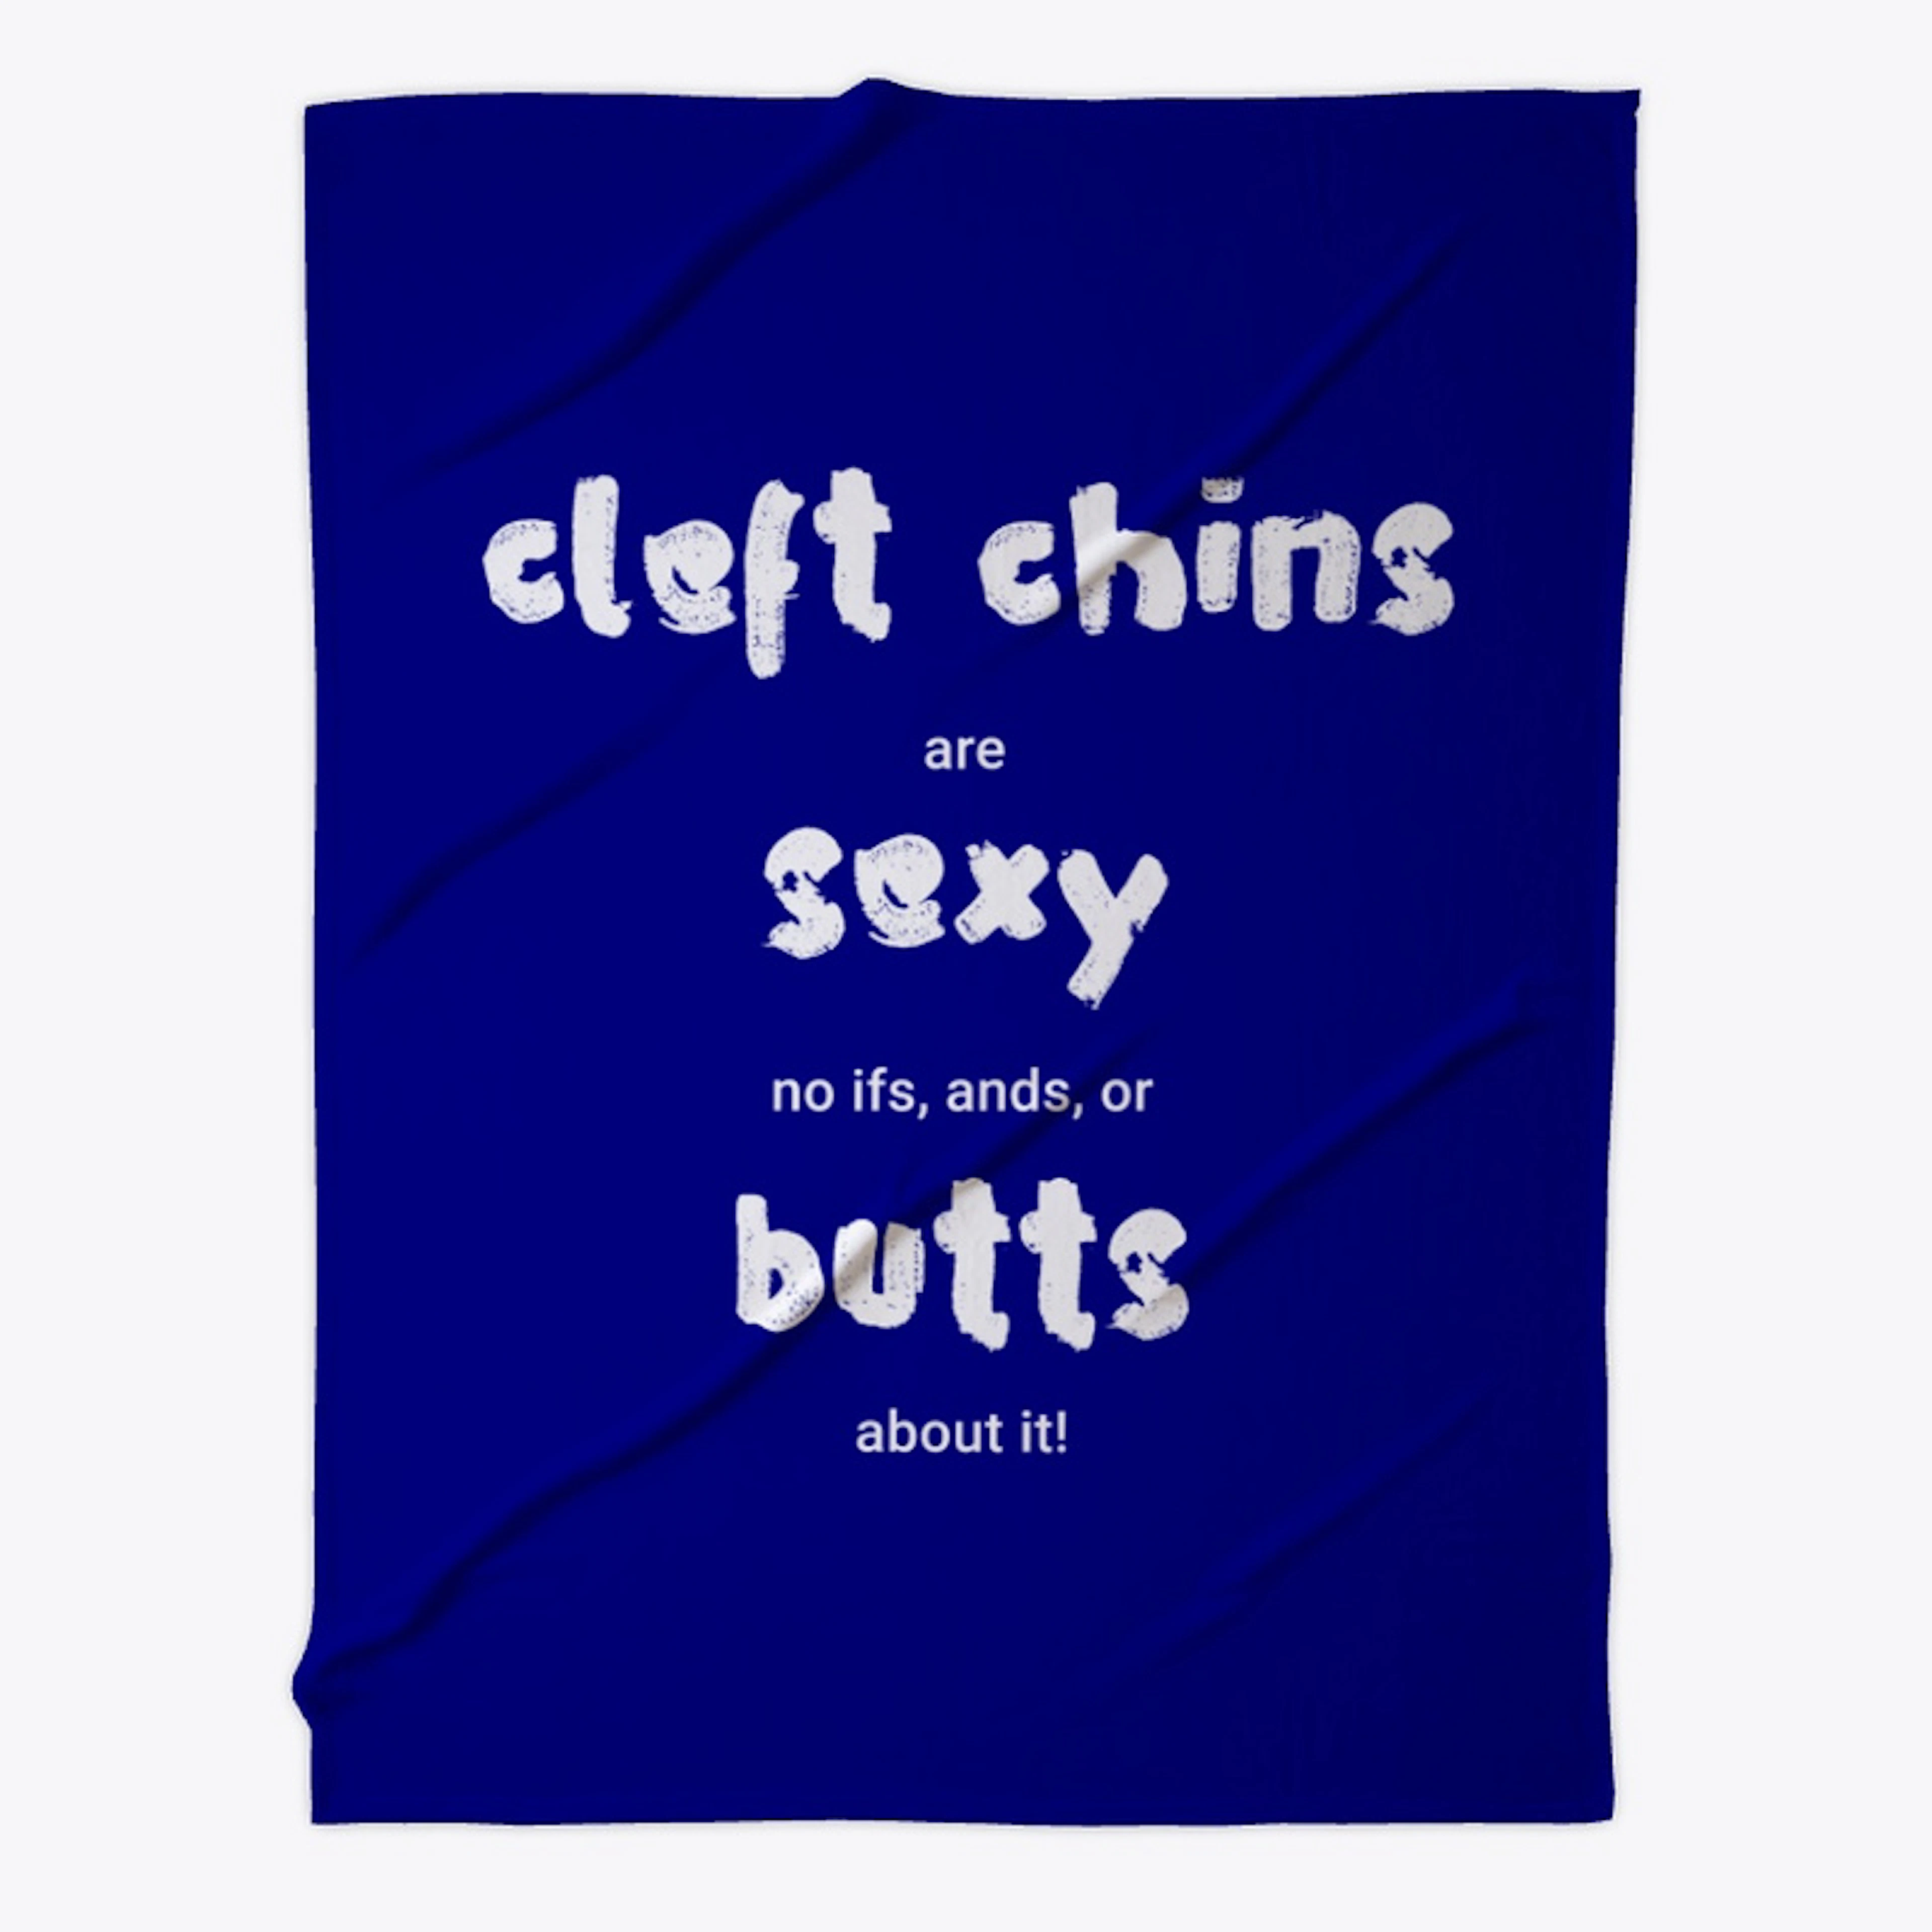 Cleft chins are sexy, no butts about it!